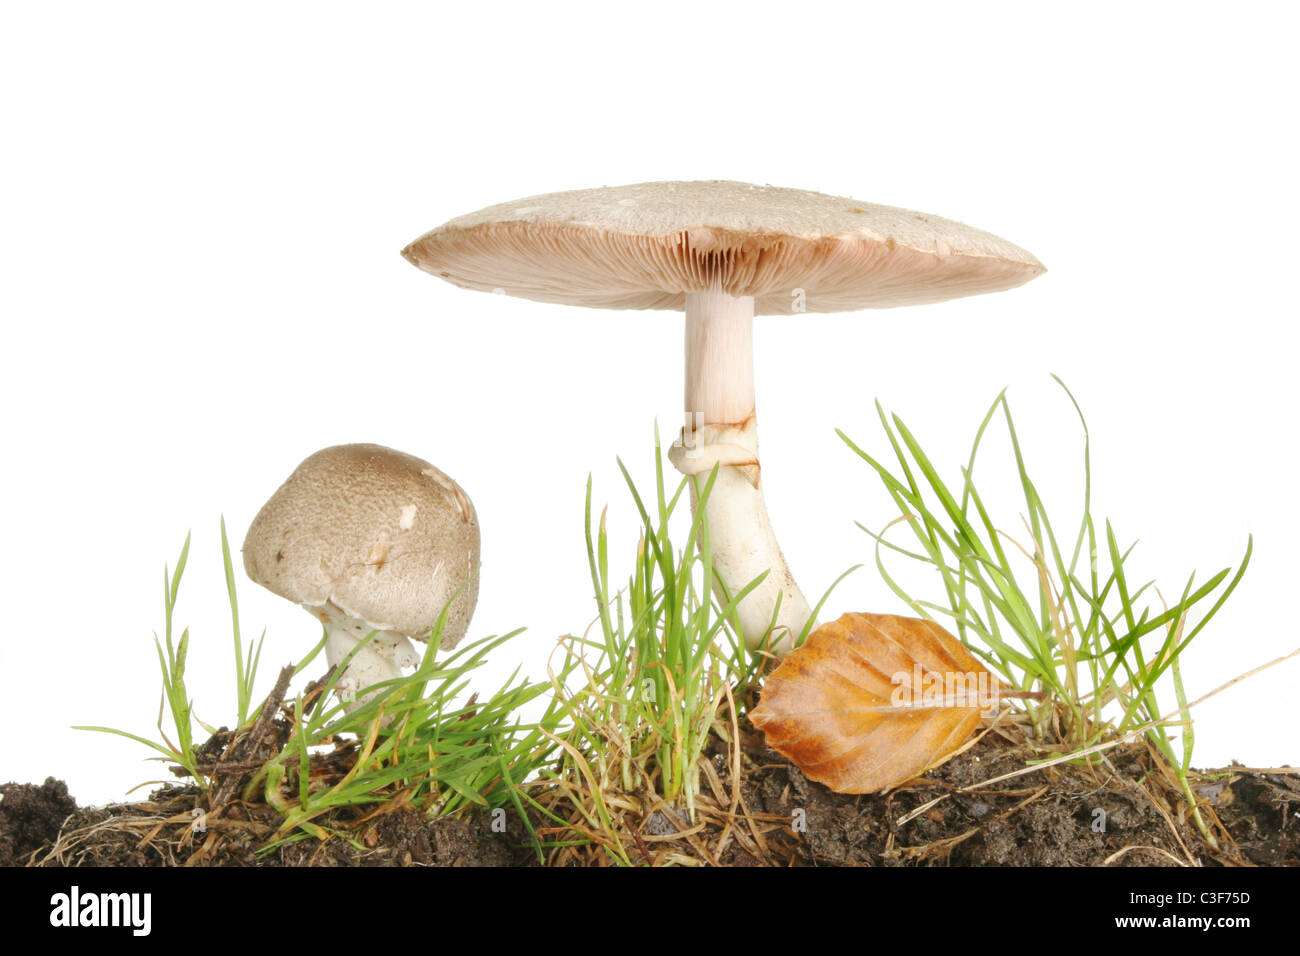 Two wild mushrooms growing in soil, grass and leaf litter Stock Photo